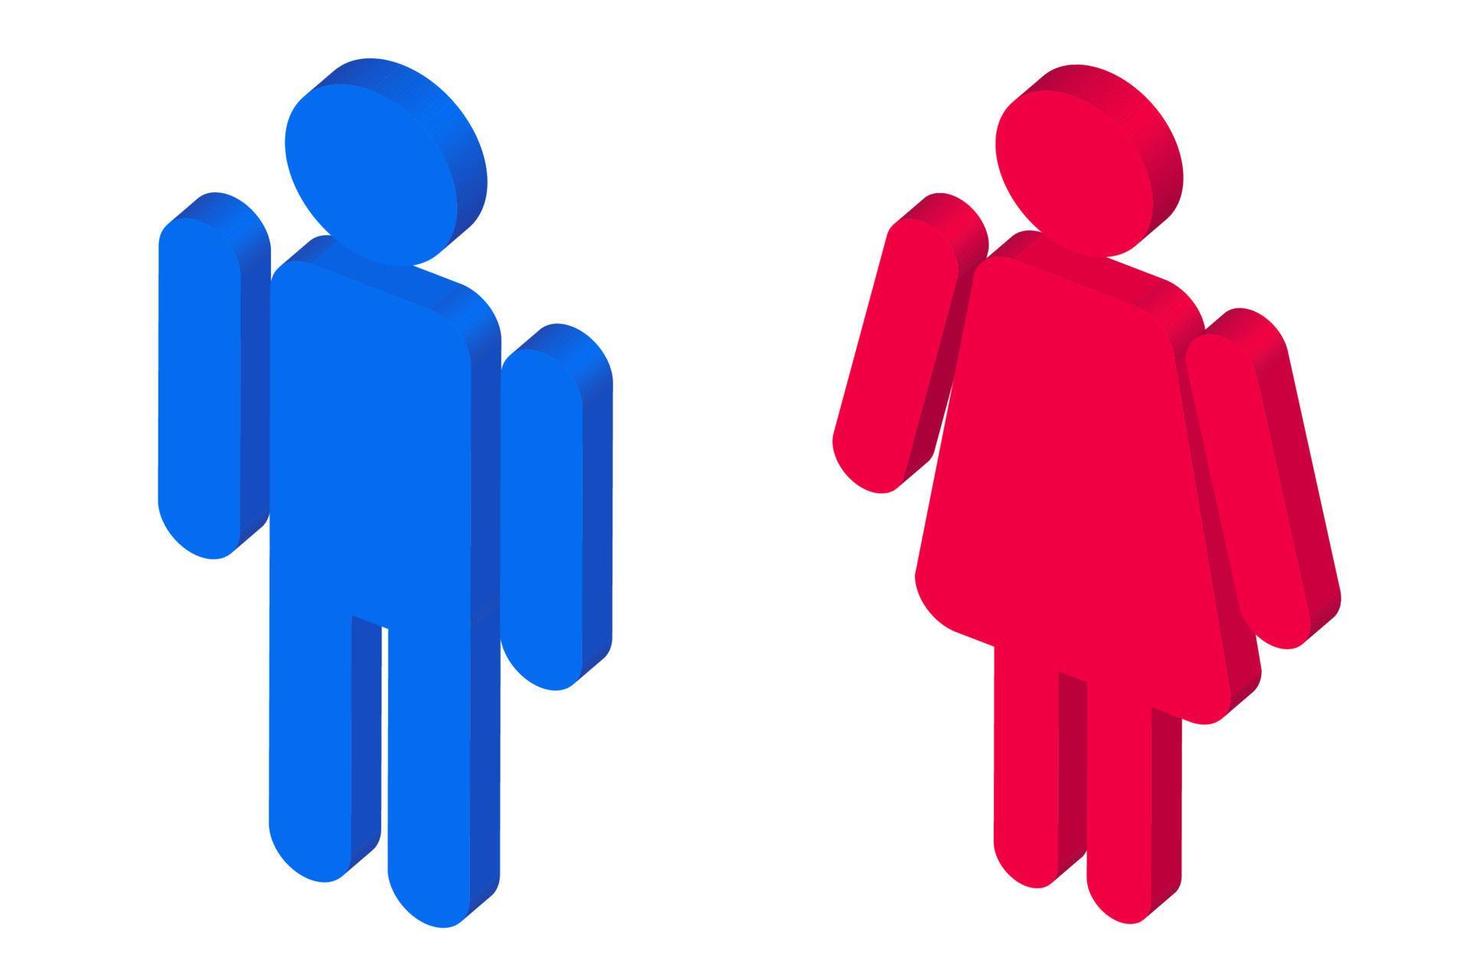 Man and woman icons isometric 3D rendering in blue and red colors. Isometric restroom icon illustration isolated on white background. vector